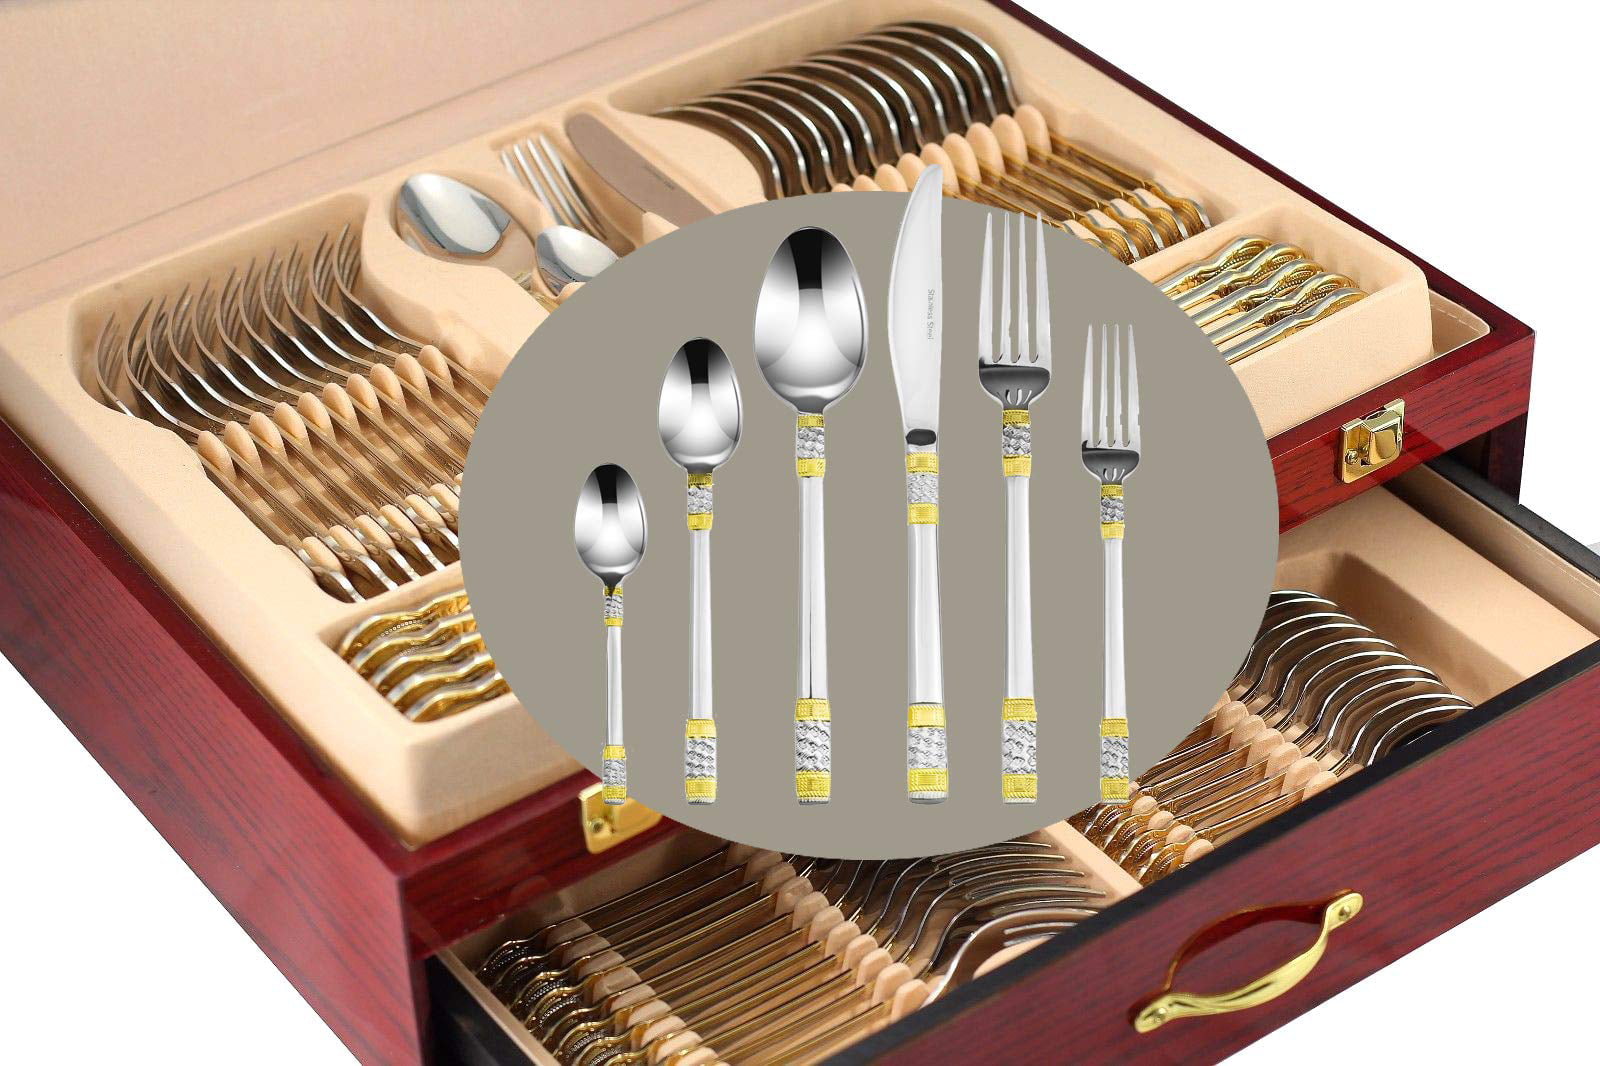 24K Gold-Plated Hostess Serving Set Venezia Collection Greek 75-Piece Fine Flatware Set Premium 18/10 Surgical Stainless Steel Silverware Cutlery Dining Service for 12 